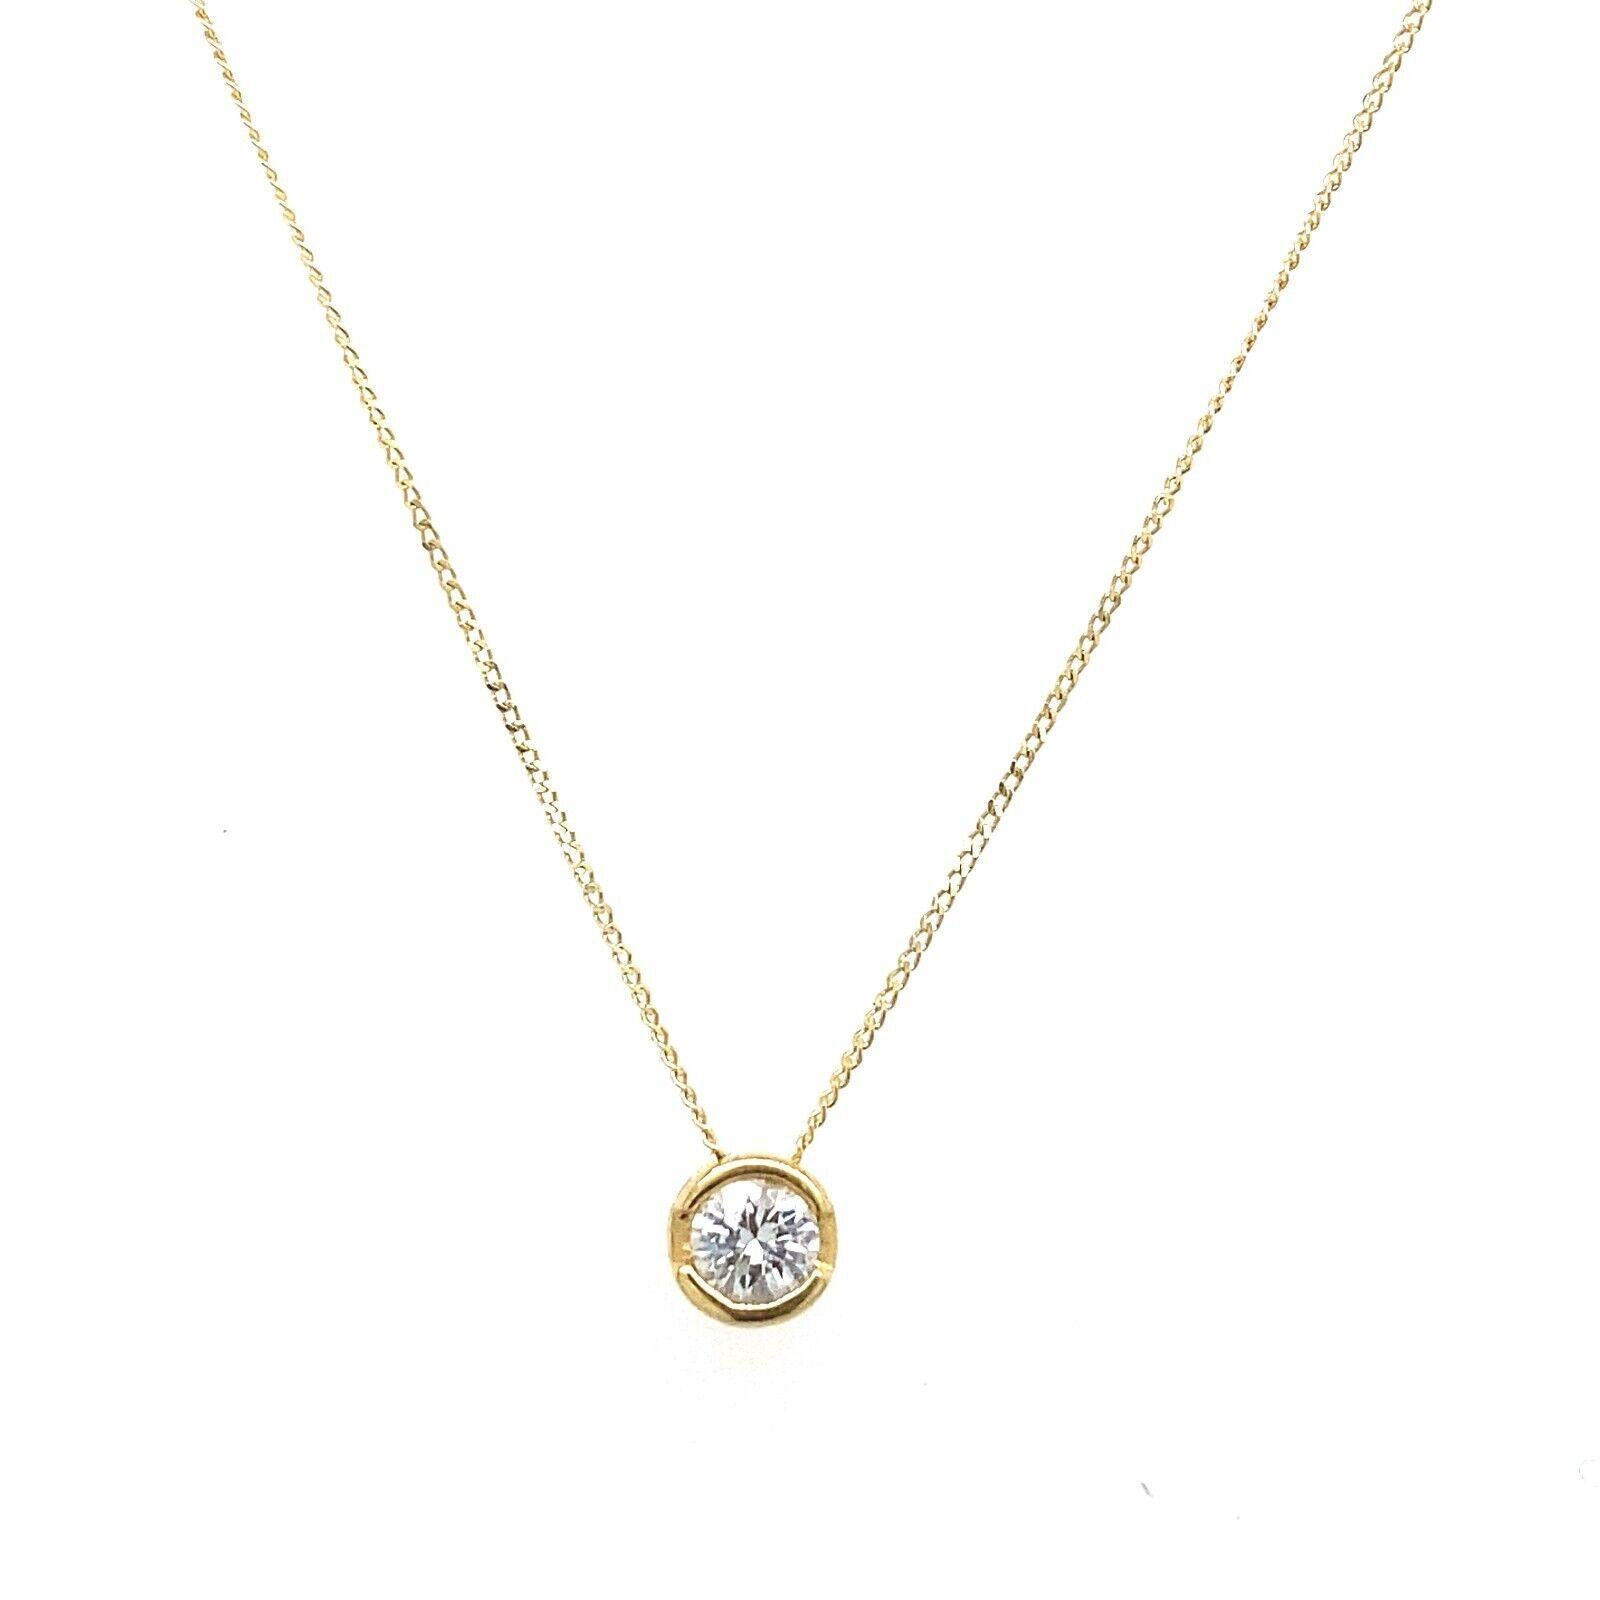 This necklace set features 1 natural round brilliant cut diamond with the total weight of 0.15ct. The diamond is set in 18ct yellow gold, and total length of the necklace is 16